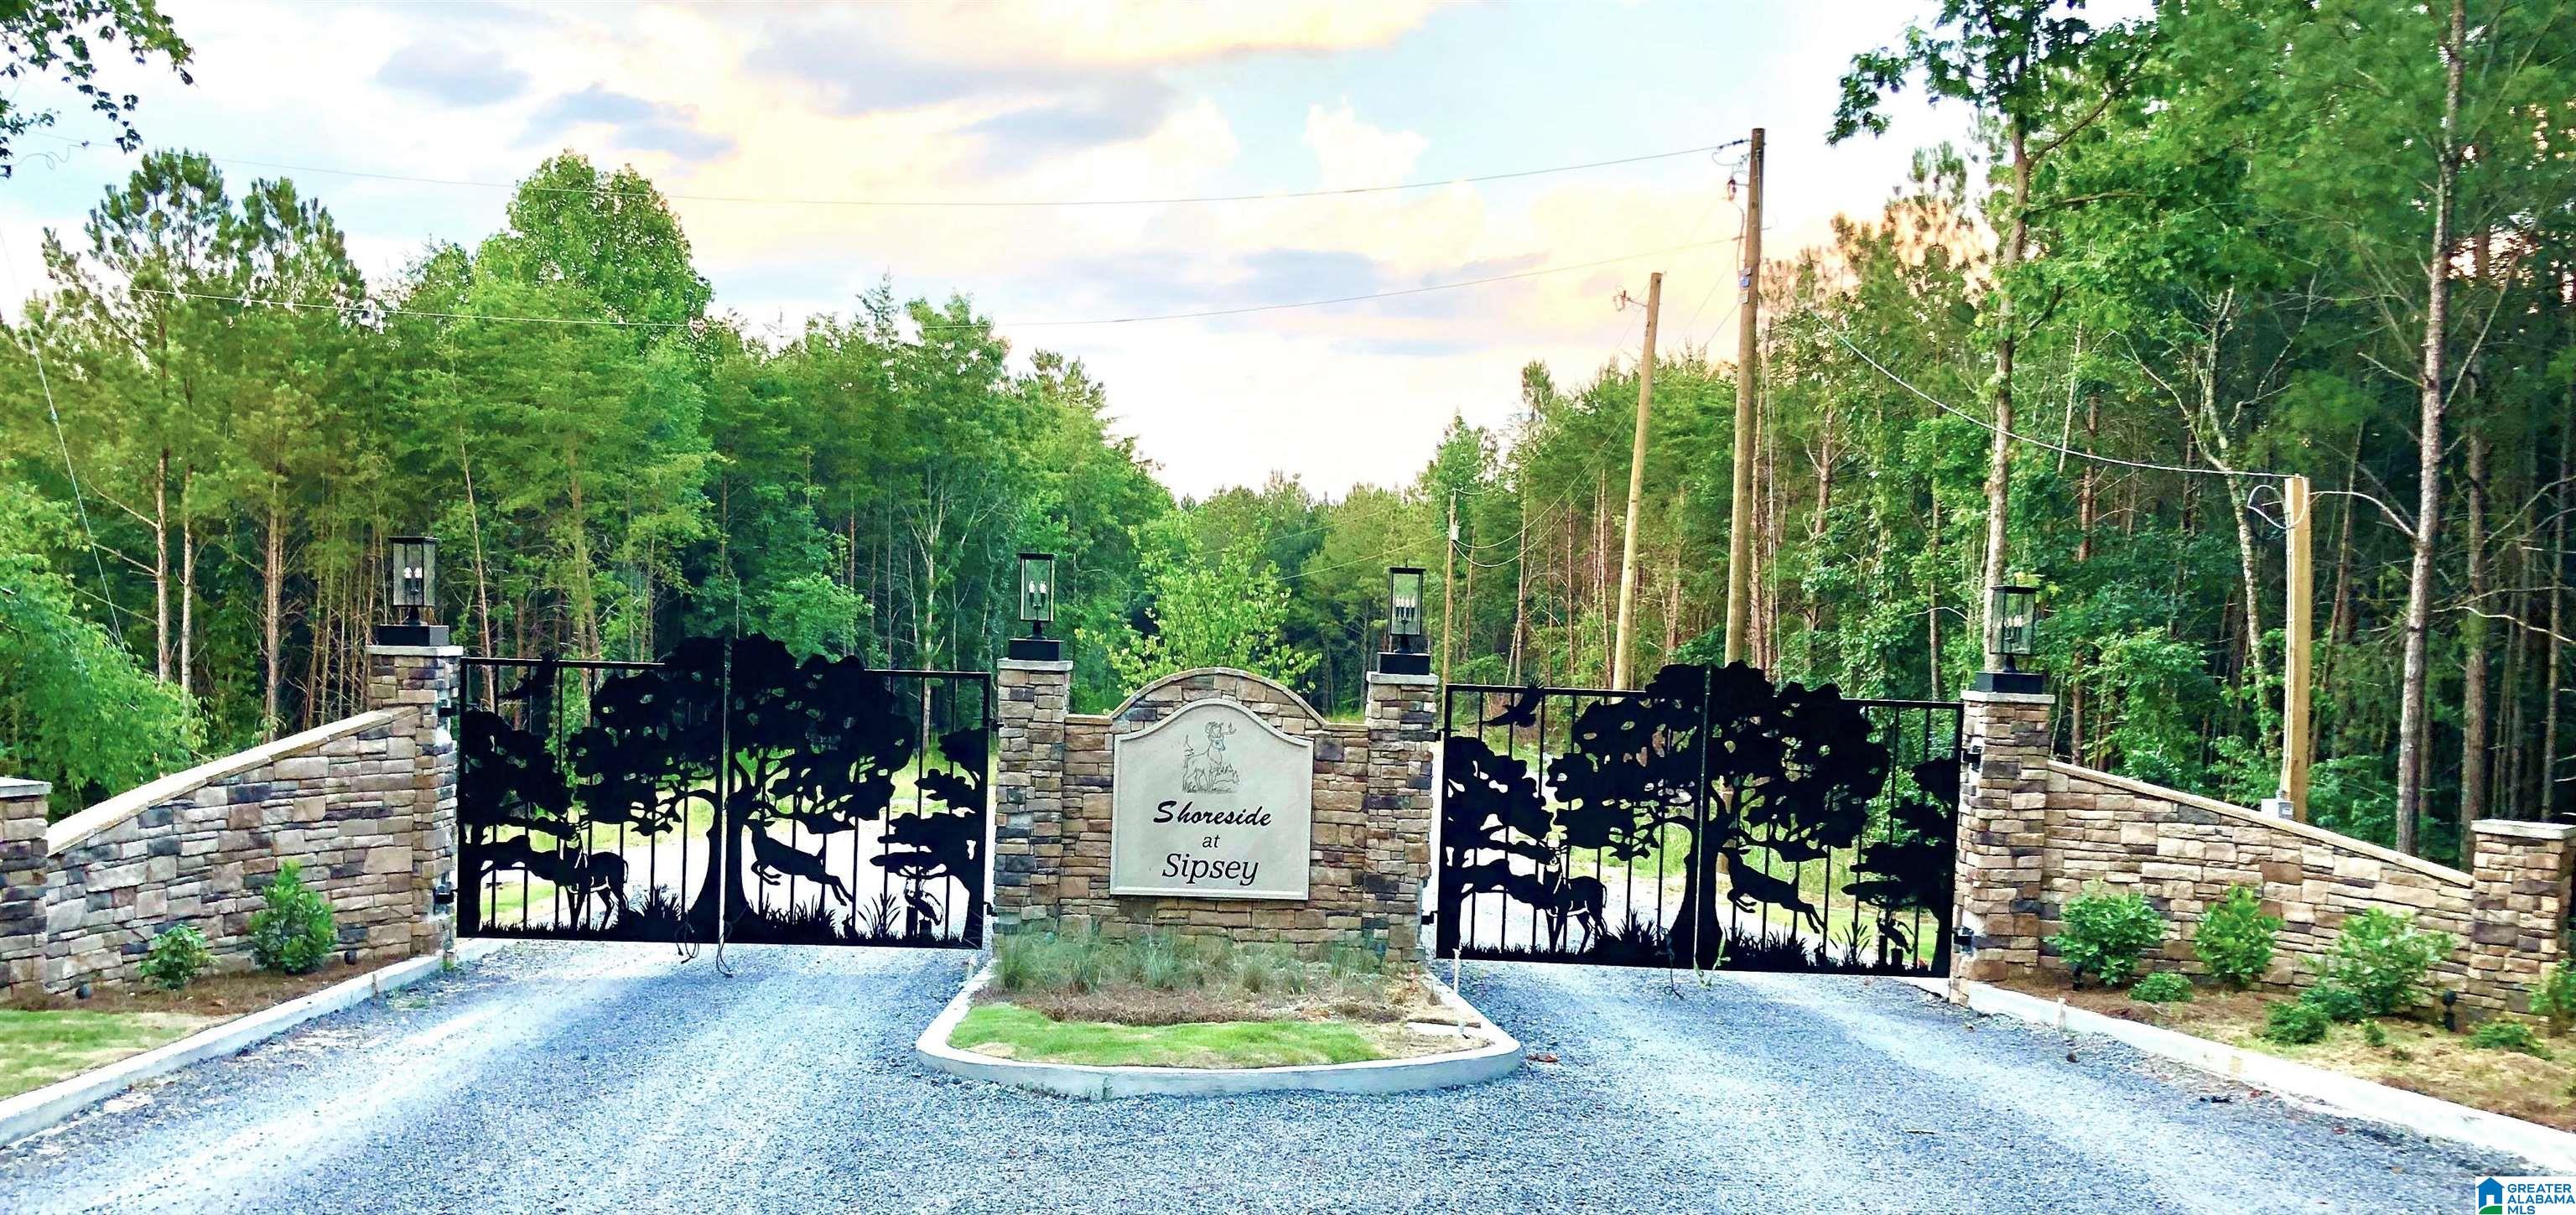 Lot 55 SHORESIDE DRIVE Lot 55 Shoreside at Sipsey, Phase III, DOUBLE SPRINGS, AL 35553